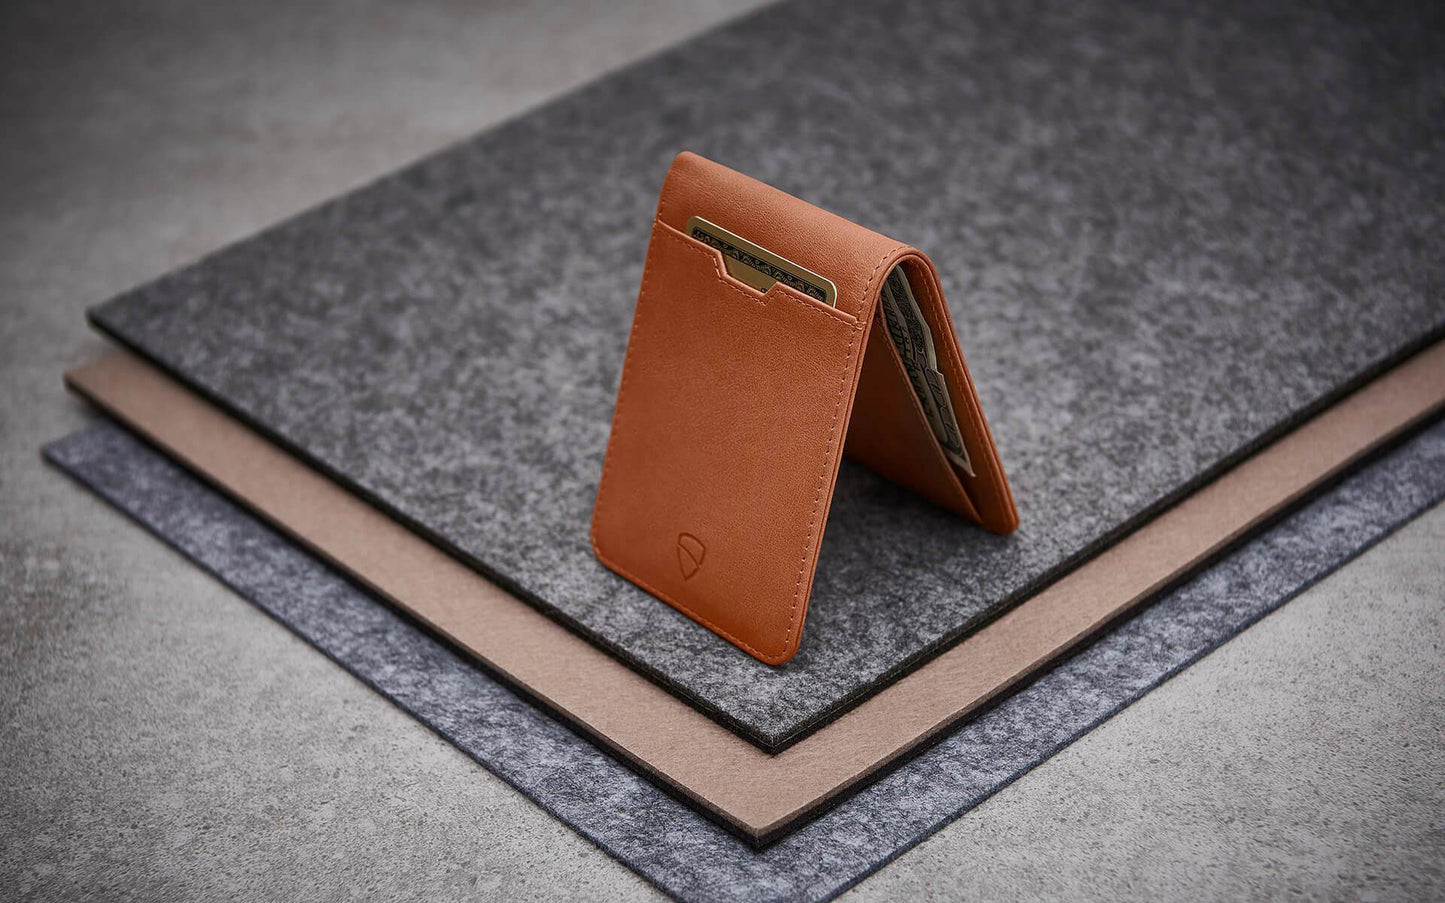 Sophisticated wallet for discerning users